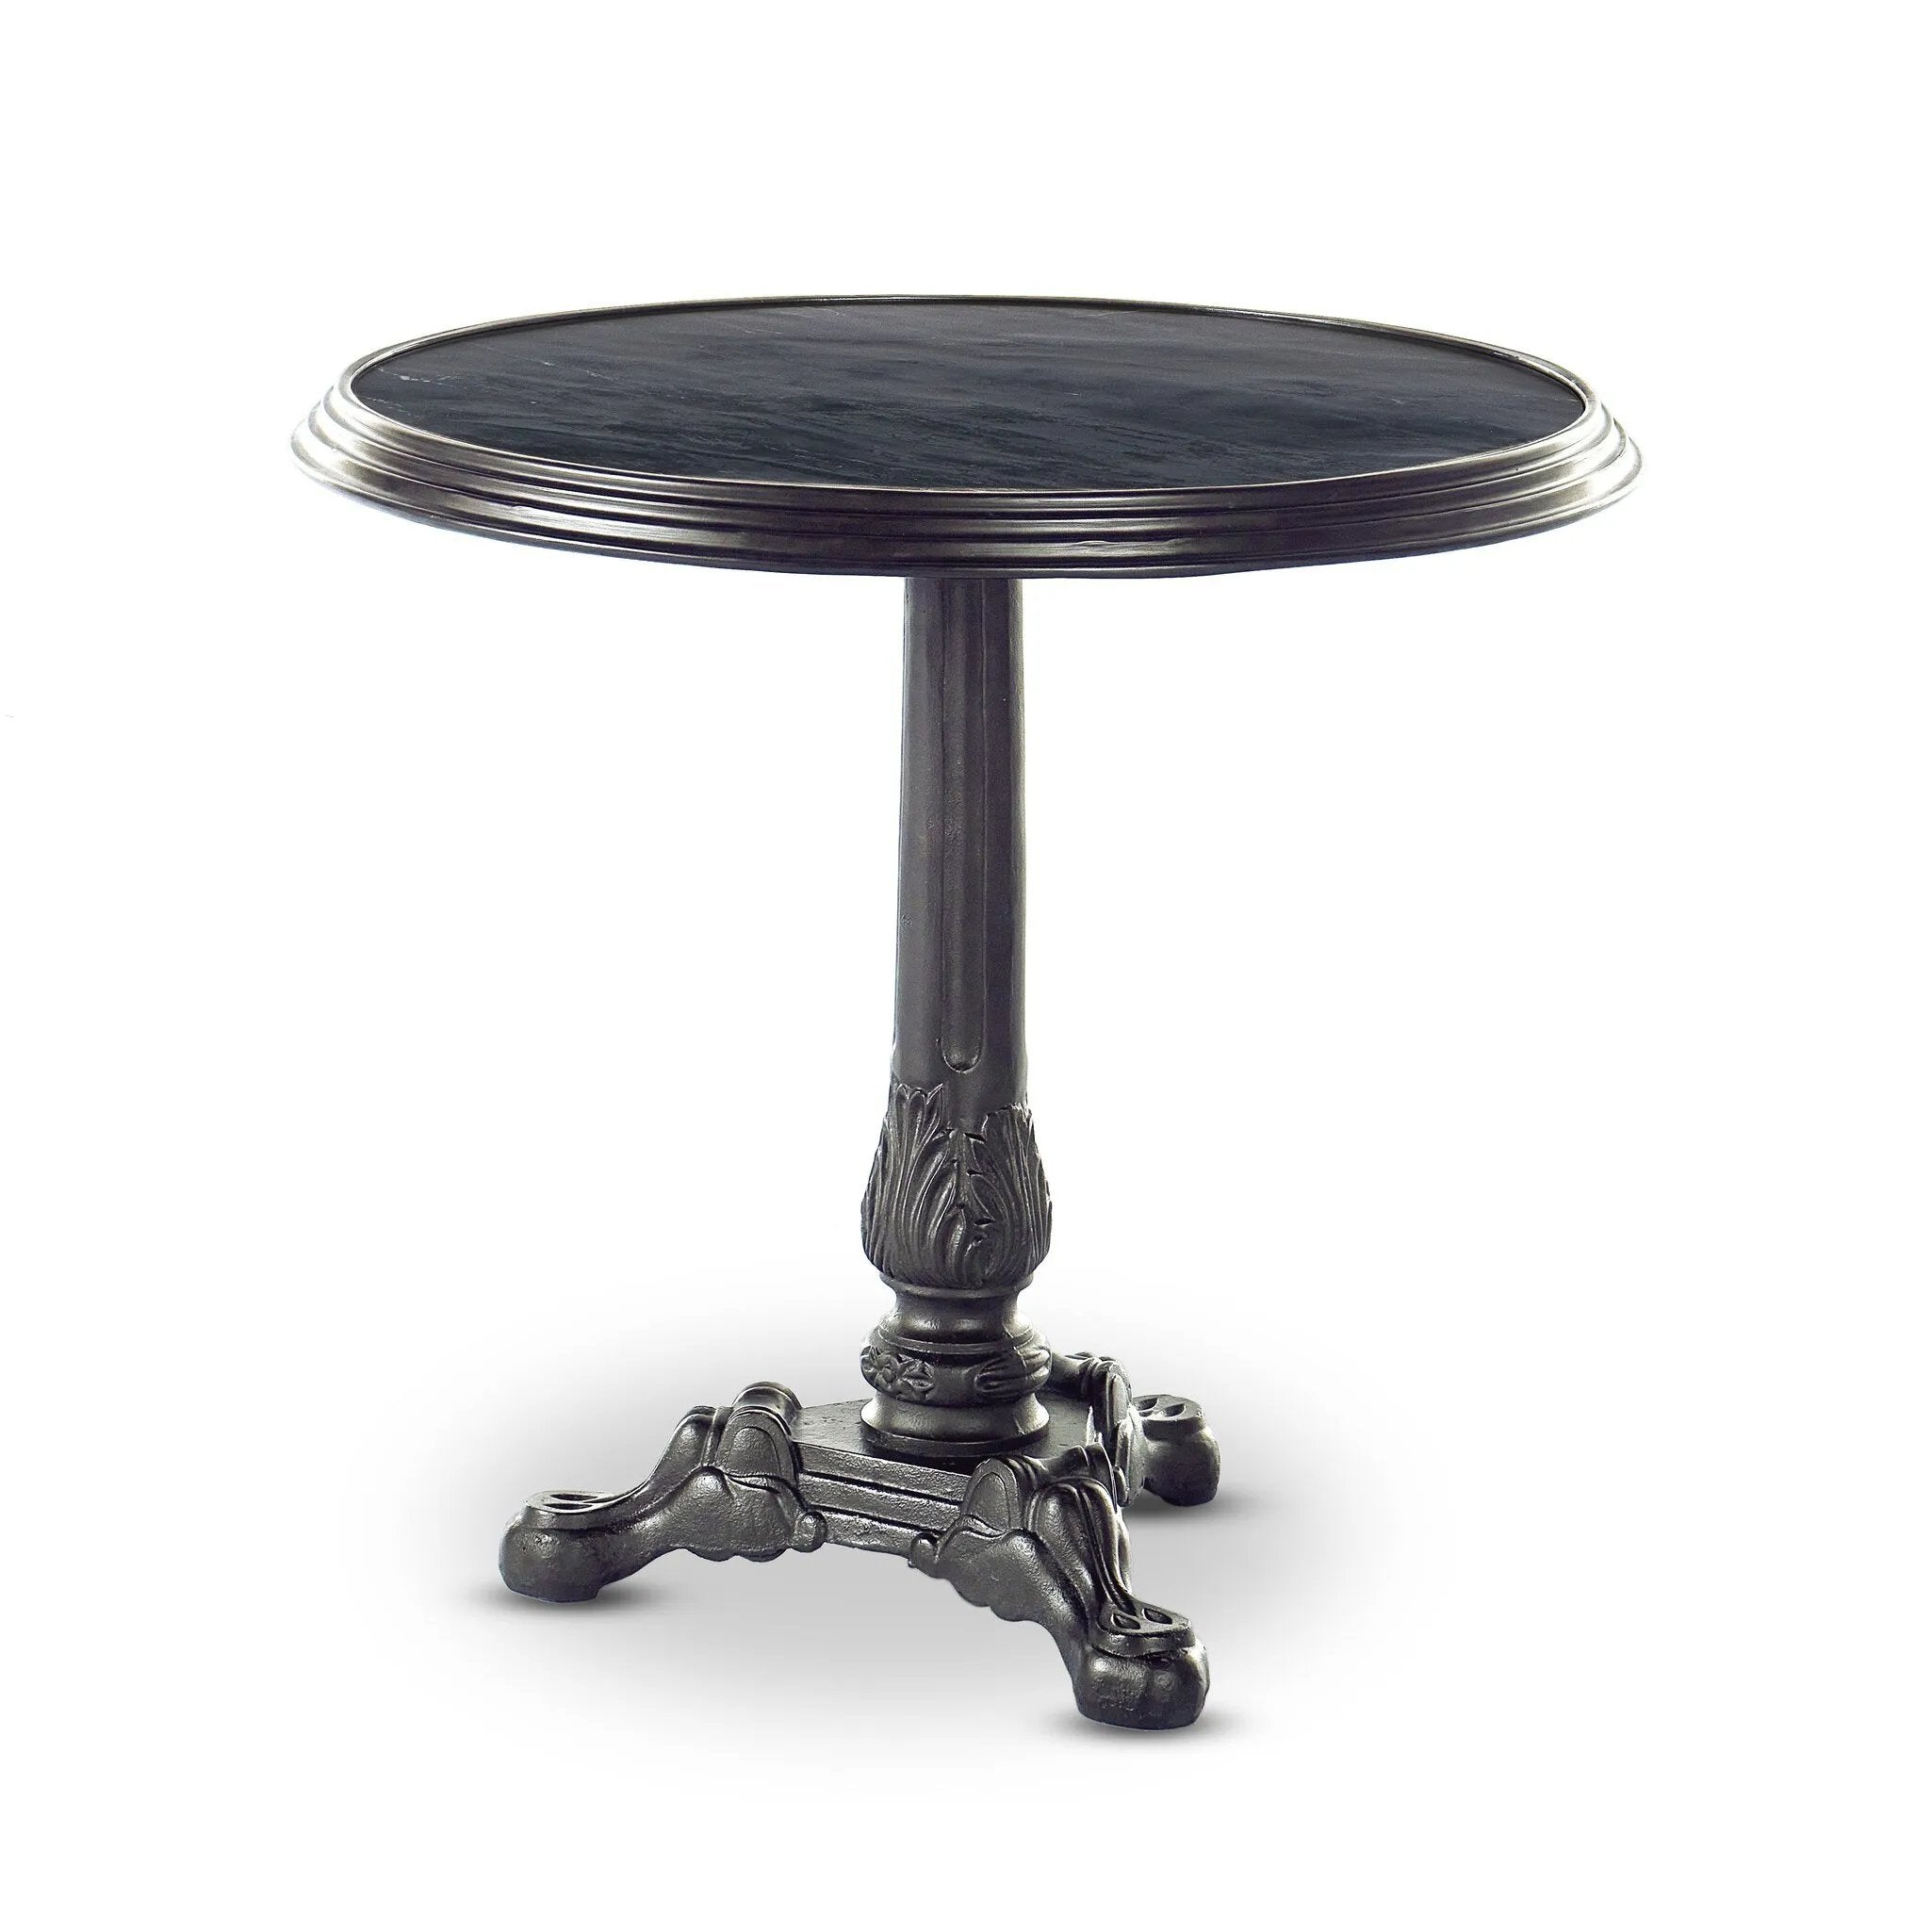 For a fresh take on classic Parisian styling, an ornate cast iron base is topped with black marble.Collection: Rockwel Amethyst Home provides interior design, new home construction design consulting, vintage area rugs, and lighting in the Houston metro area.